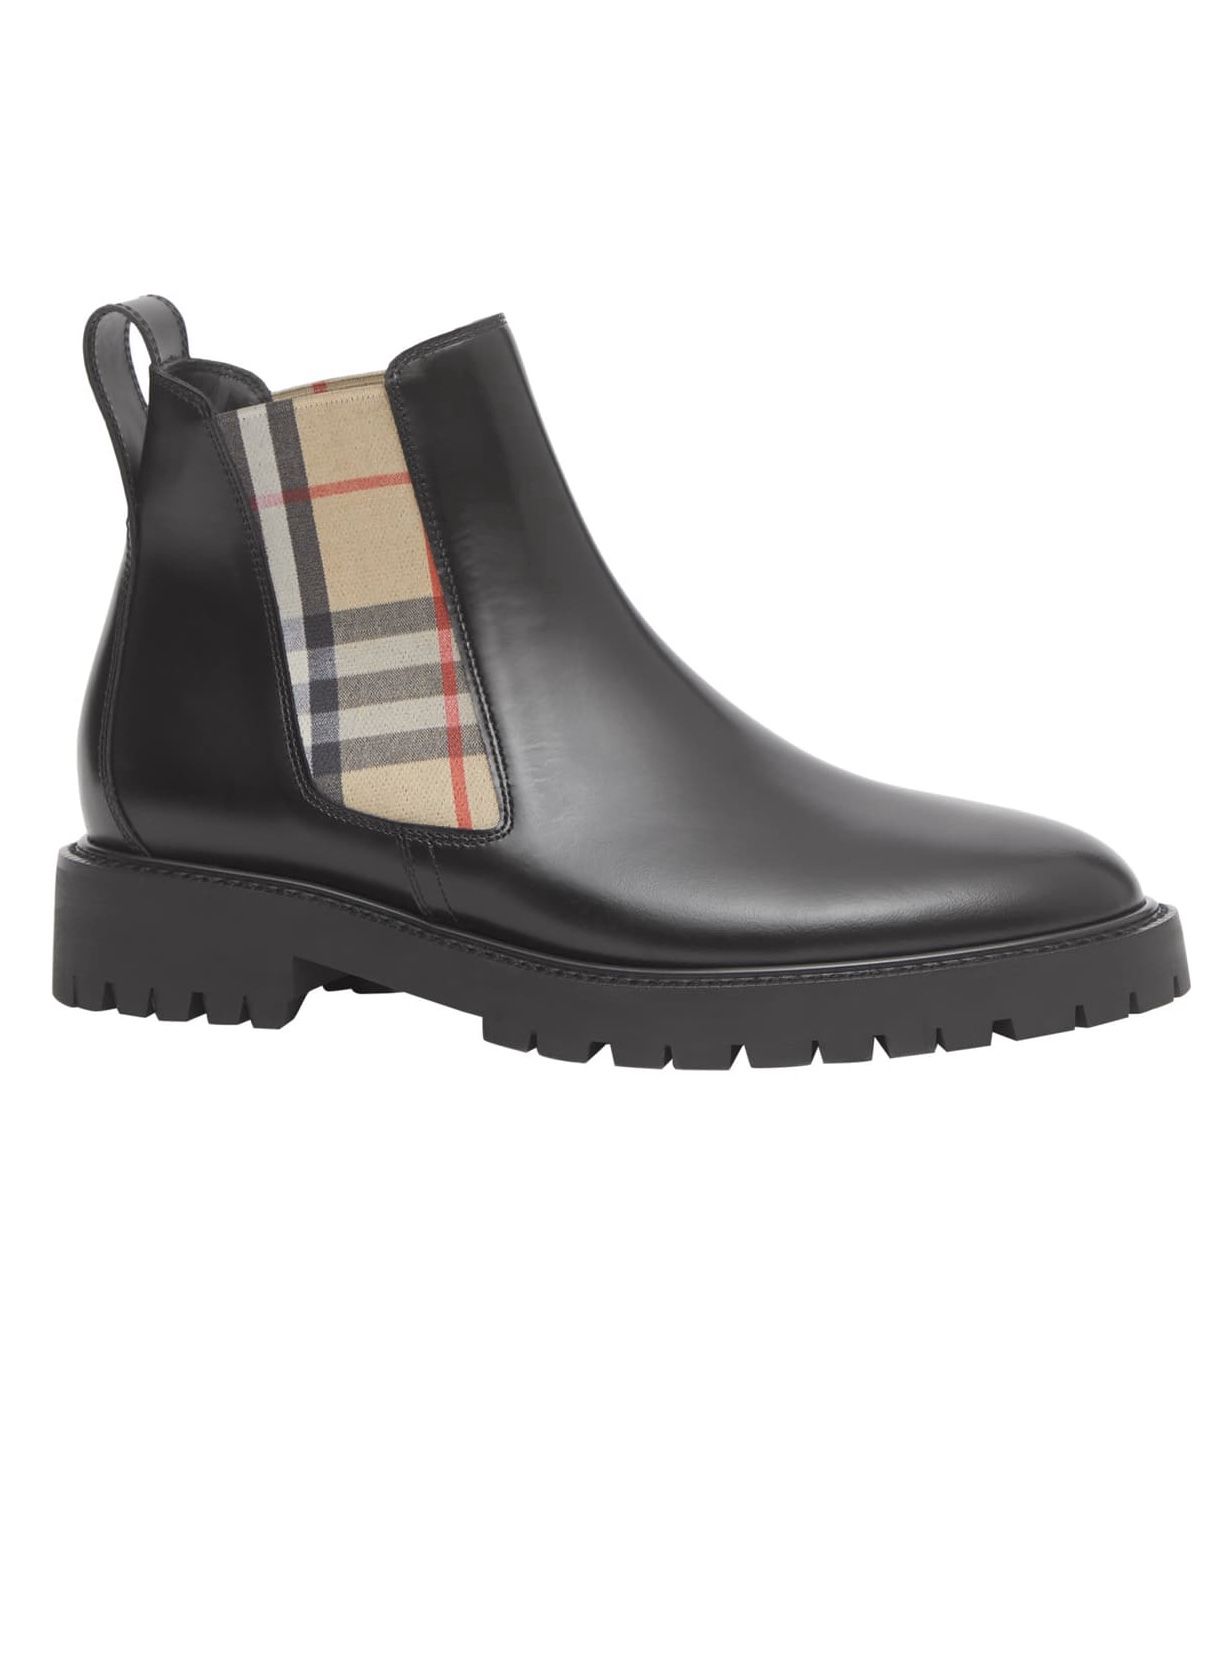 Authentic Burberry Allostock Check Chelsea Boots size 38